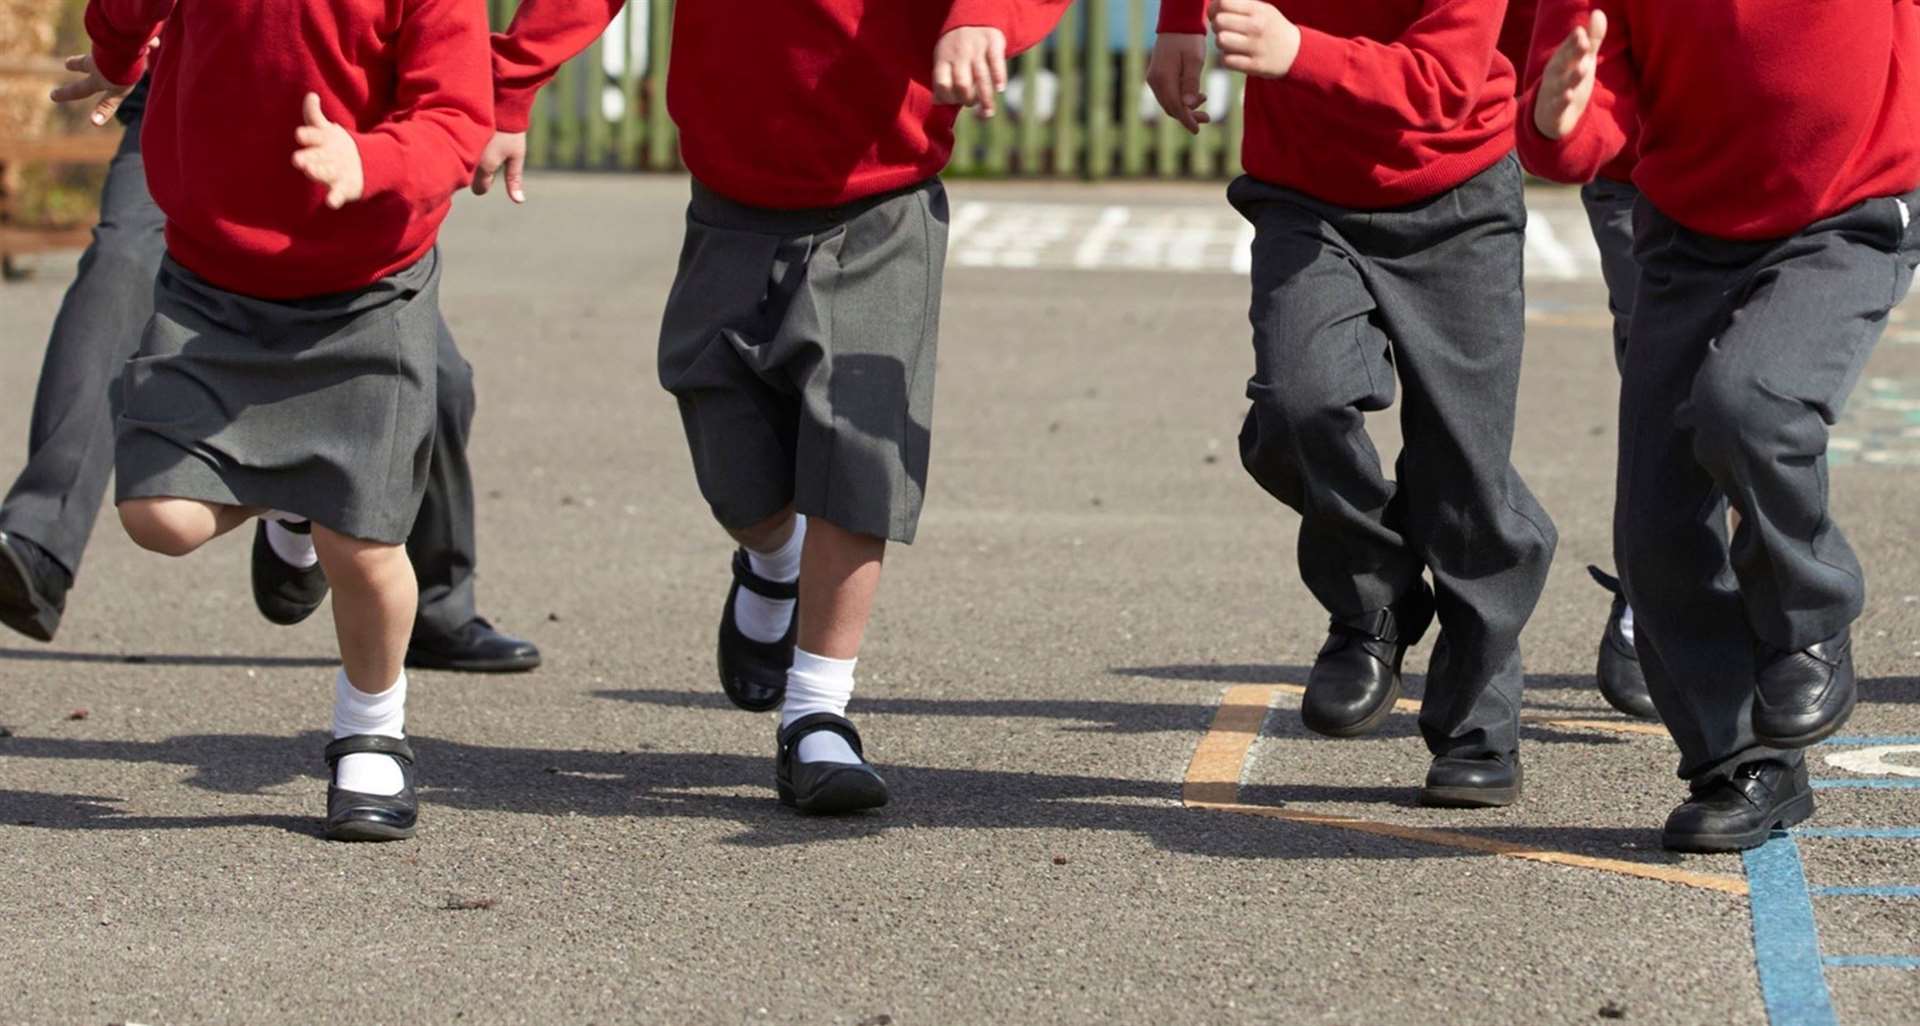 British Bulldog involved children running to opposite ends of playgrounds, streets or fields without getting caught but was banned by some schools for being a rough game